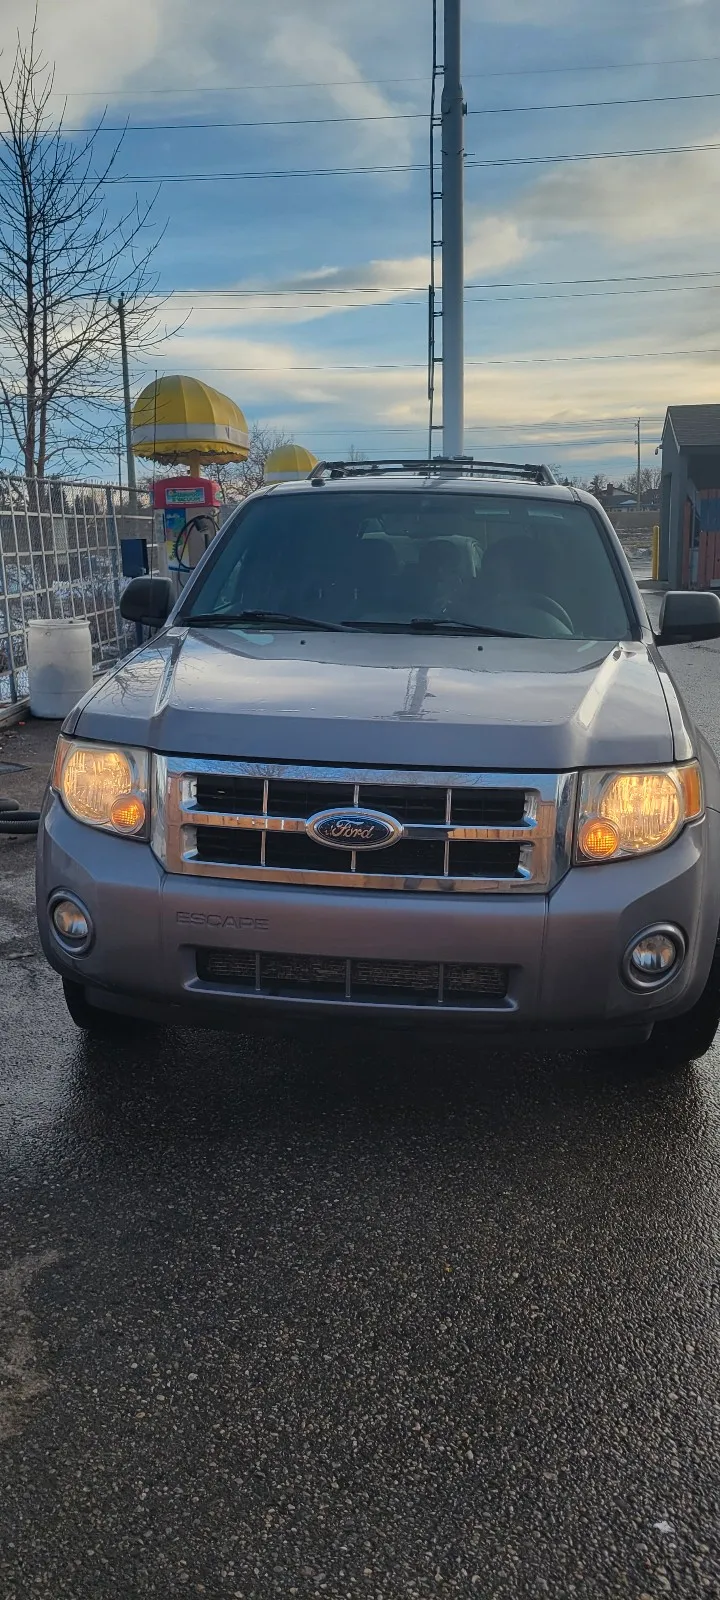 2008 Ford Escape XLT 2008 Ford Escape XLT